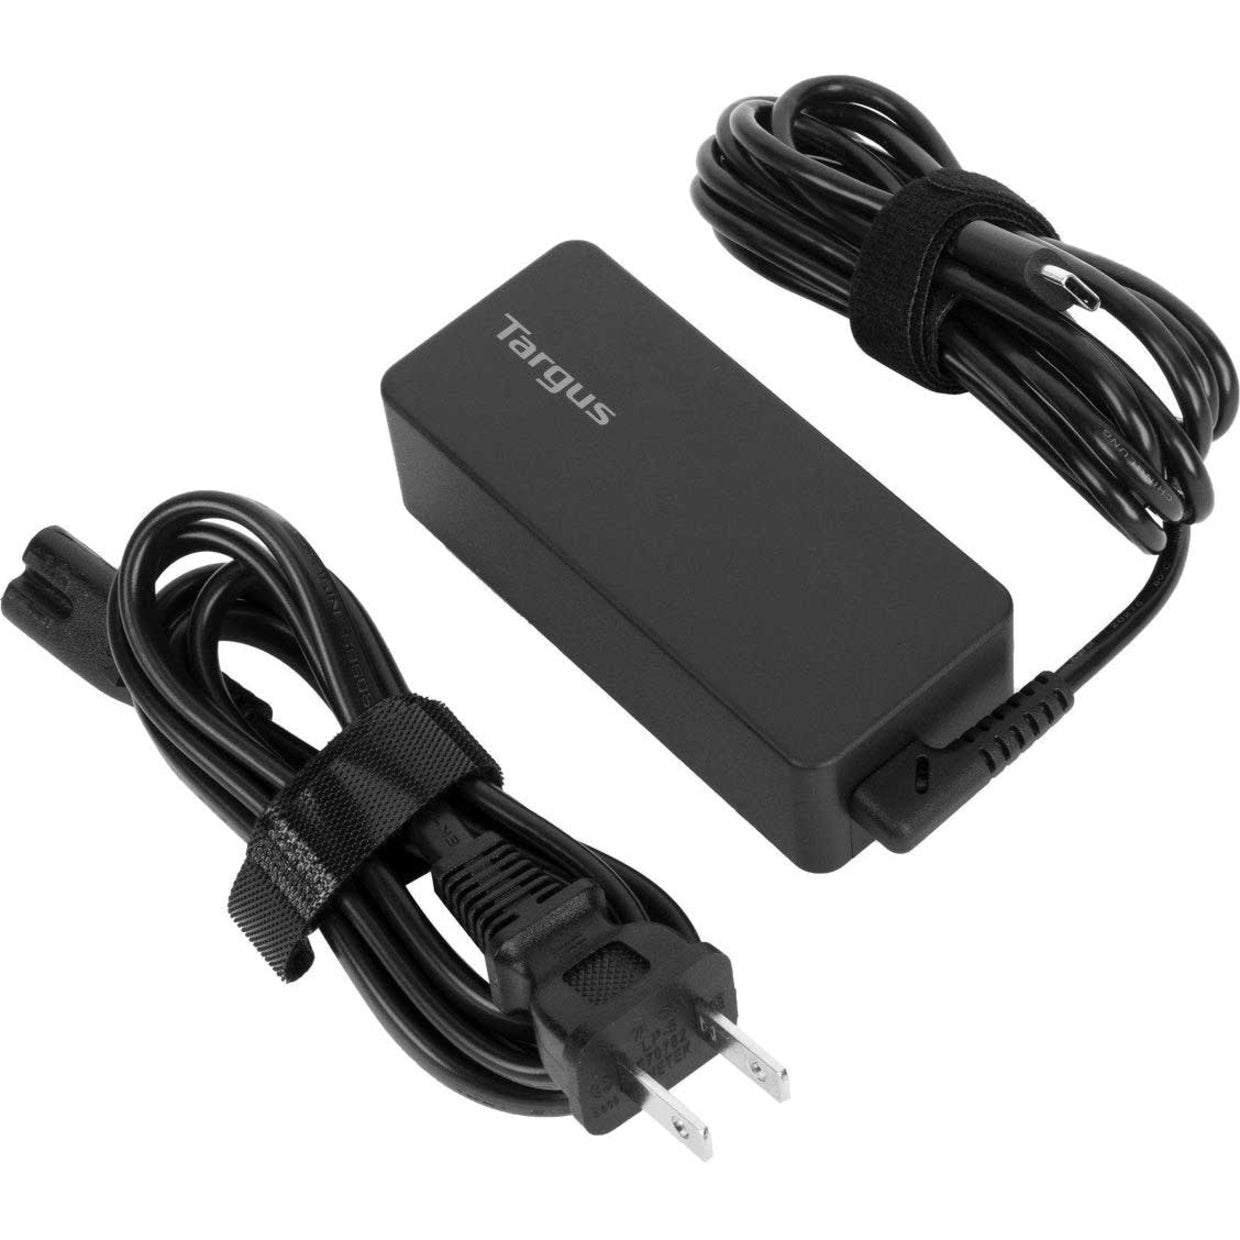 Targus 45W USB-C Charger - Fast Charging for Tablets, Smartphones, and Notebooks [Discontinued]